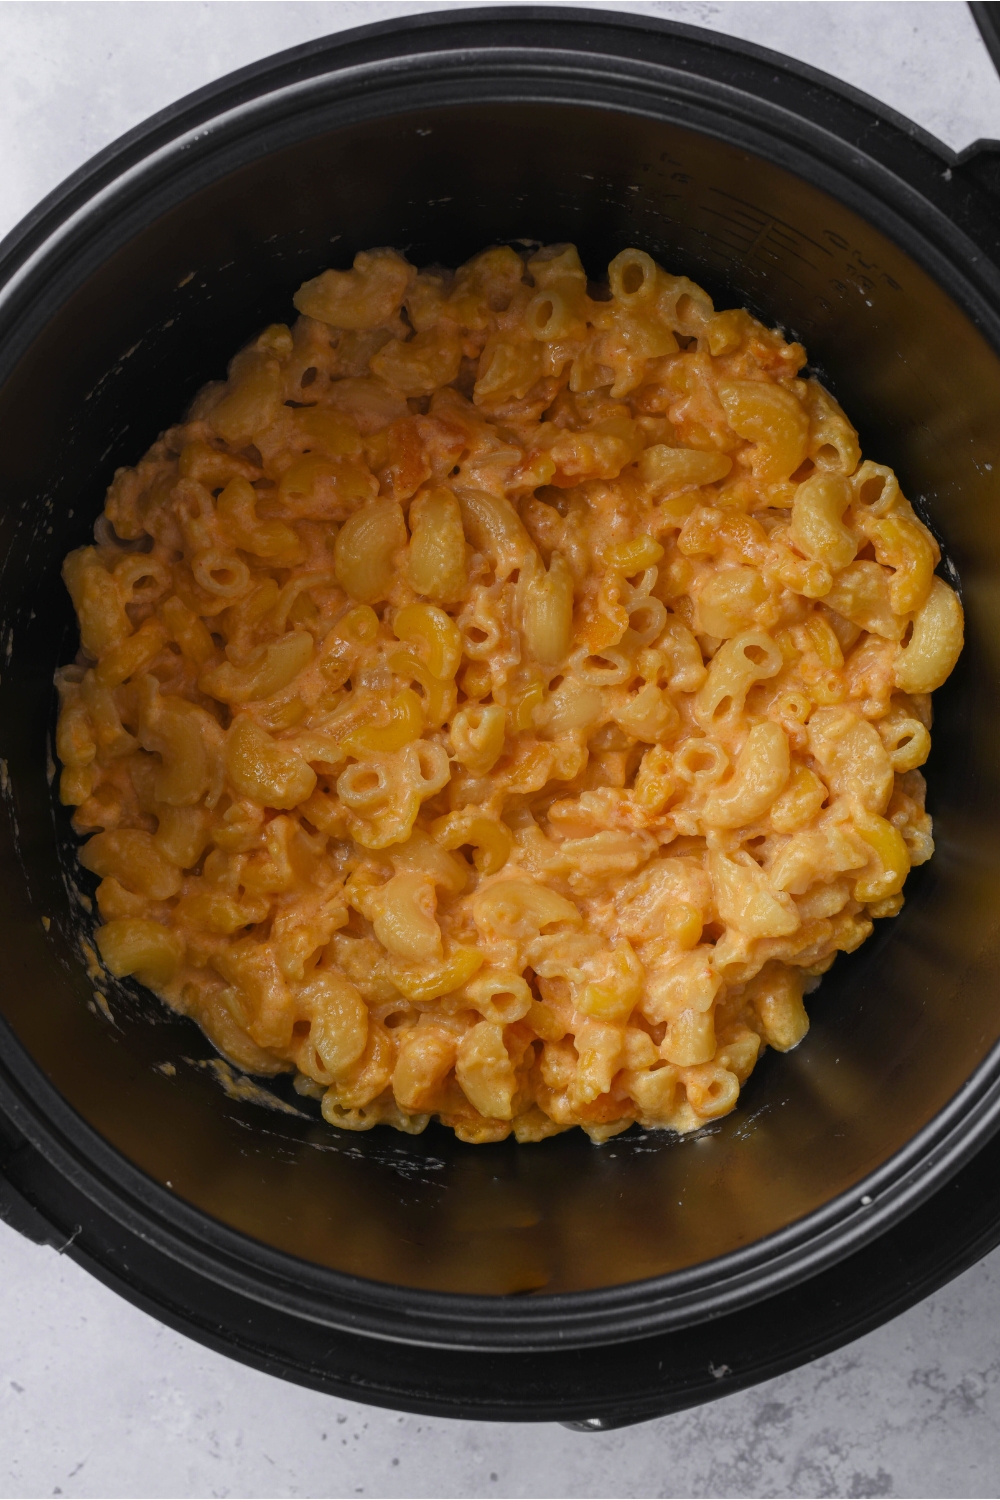 A crockpot with cooked mac and cheese.